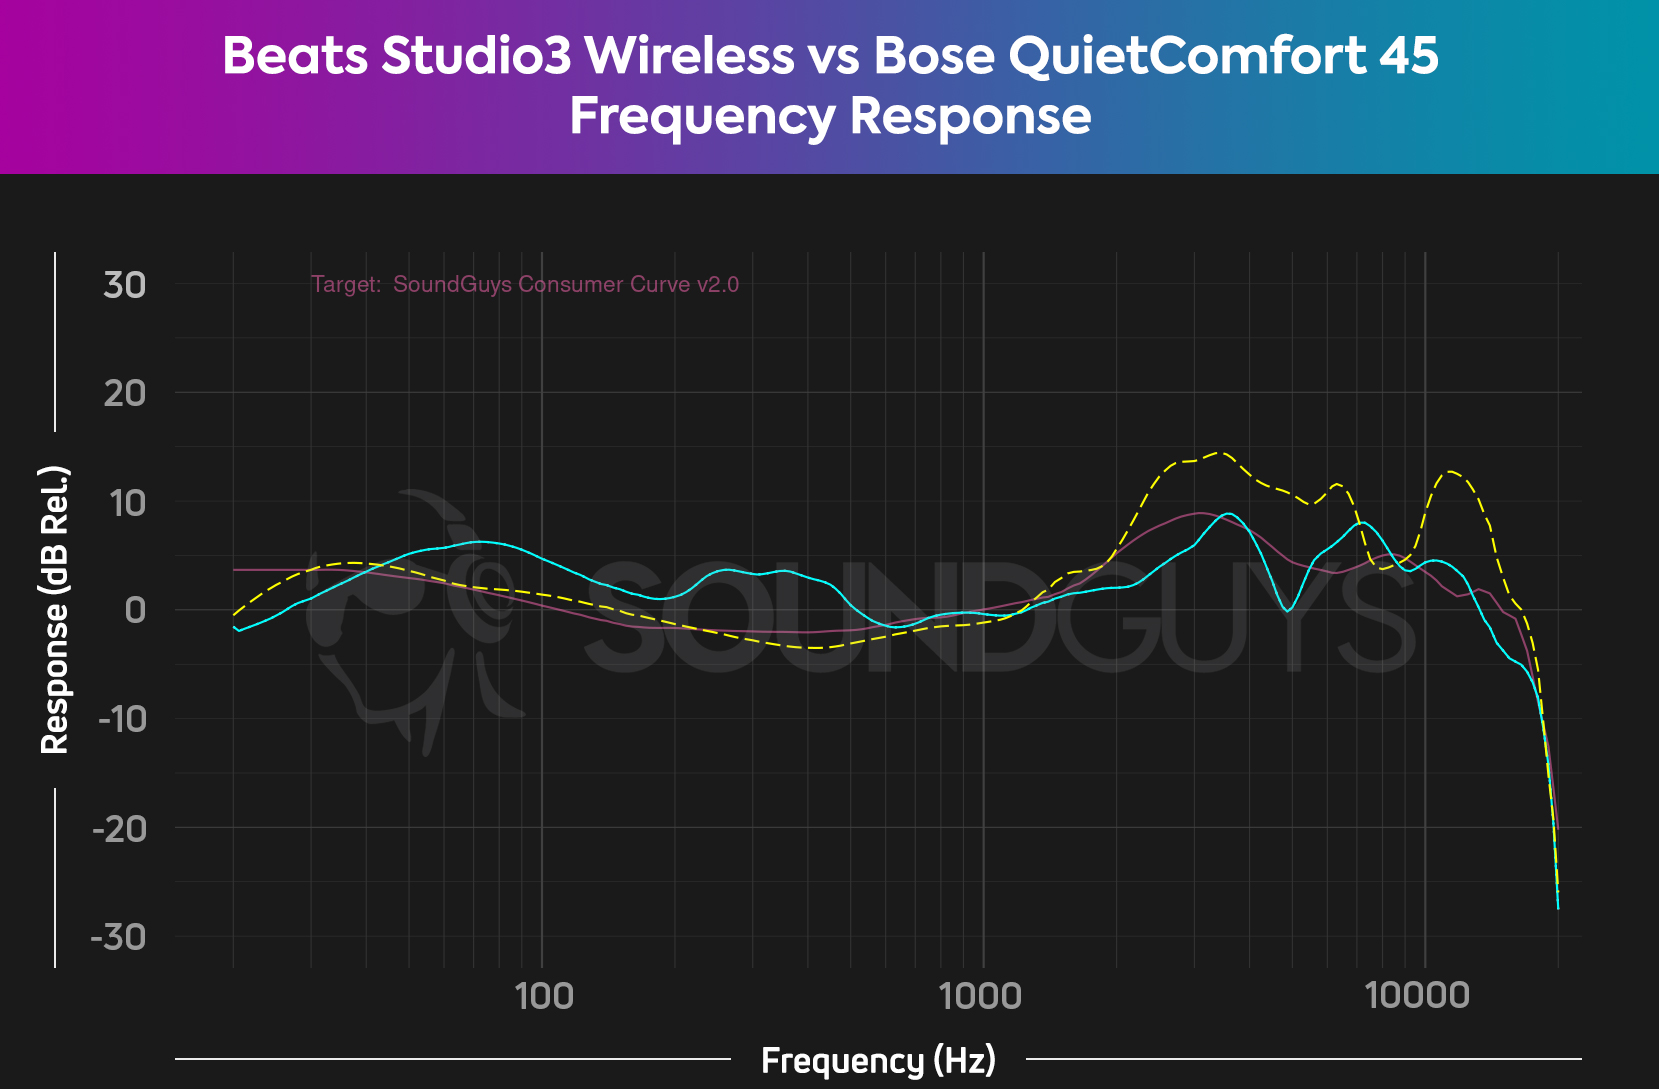 A frequency response chart compares the Beats Studio3 Wireless (cyan) headset to the Bose QuietComfort 45 (yellow dash) against our consumer curve V2 (pink), and reveals that both have their shortcomings.